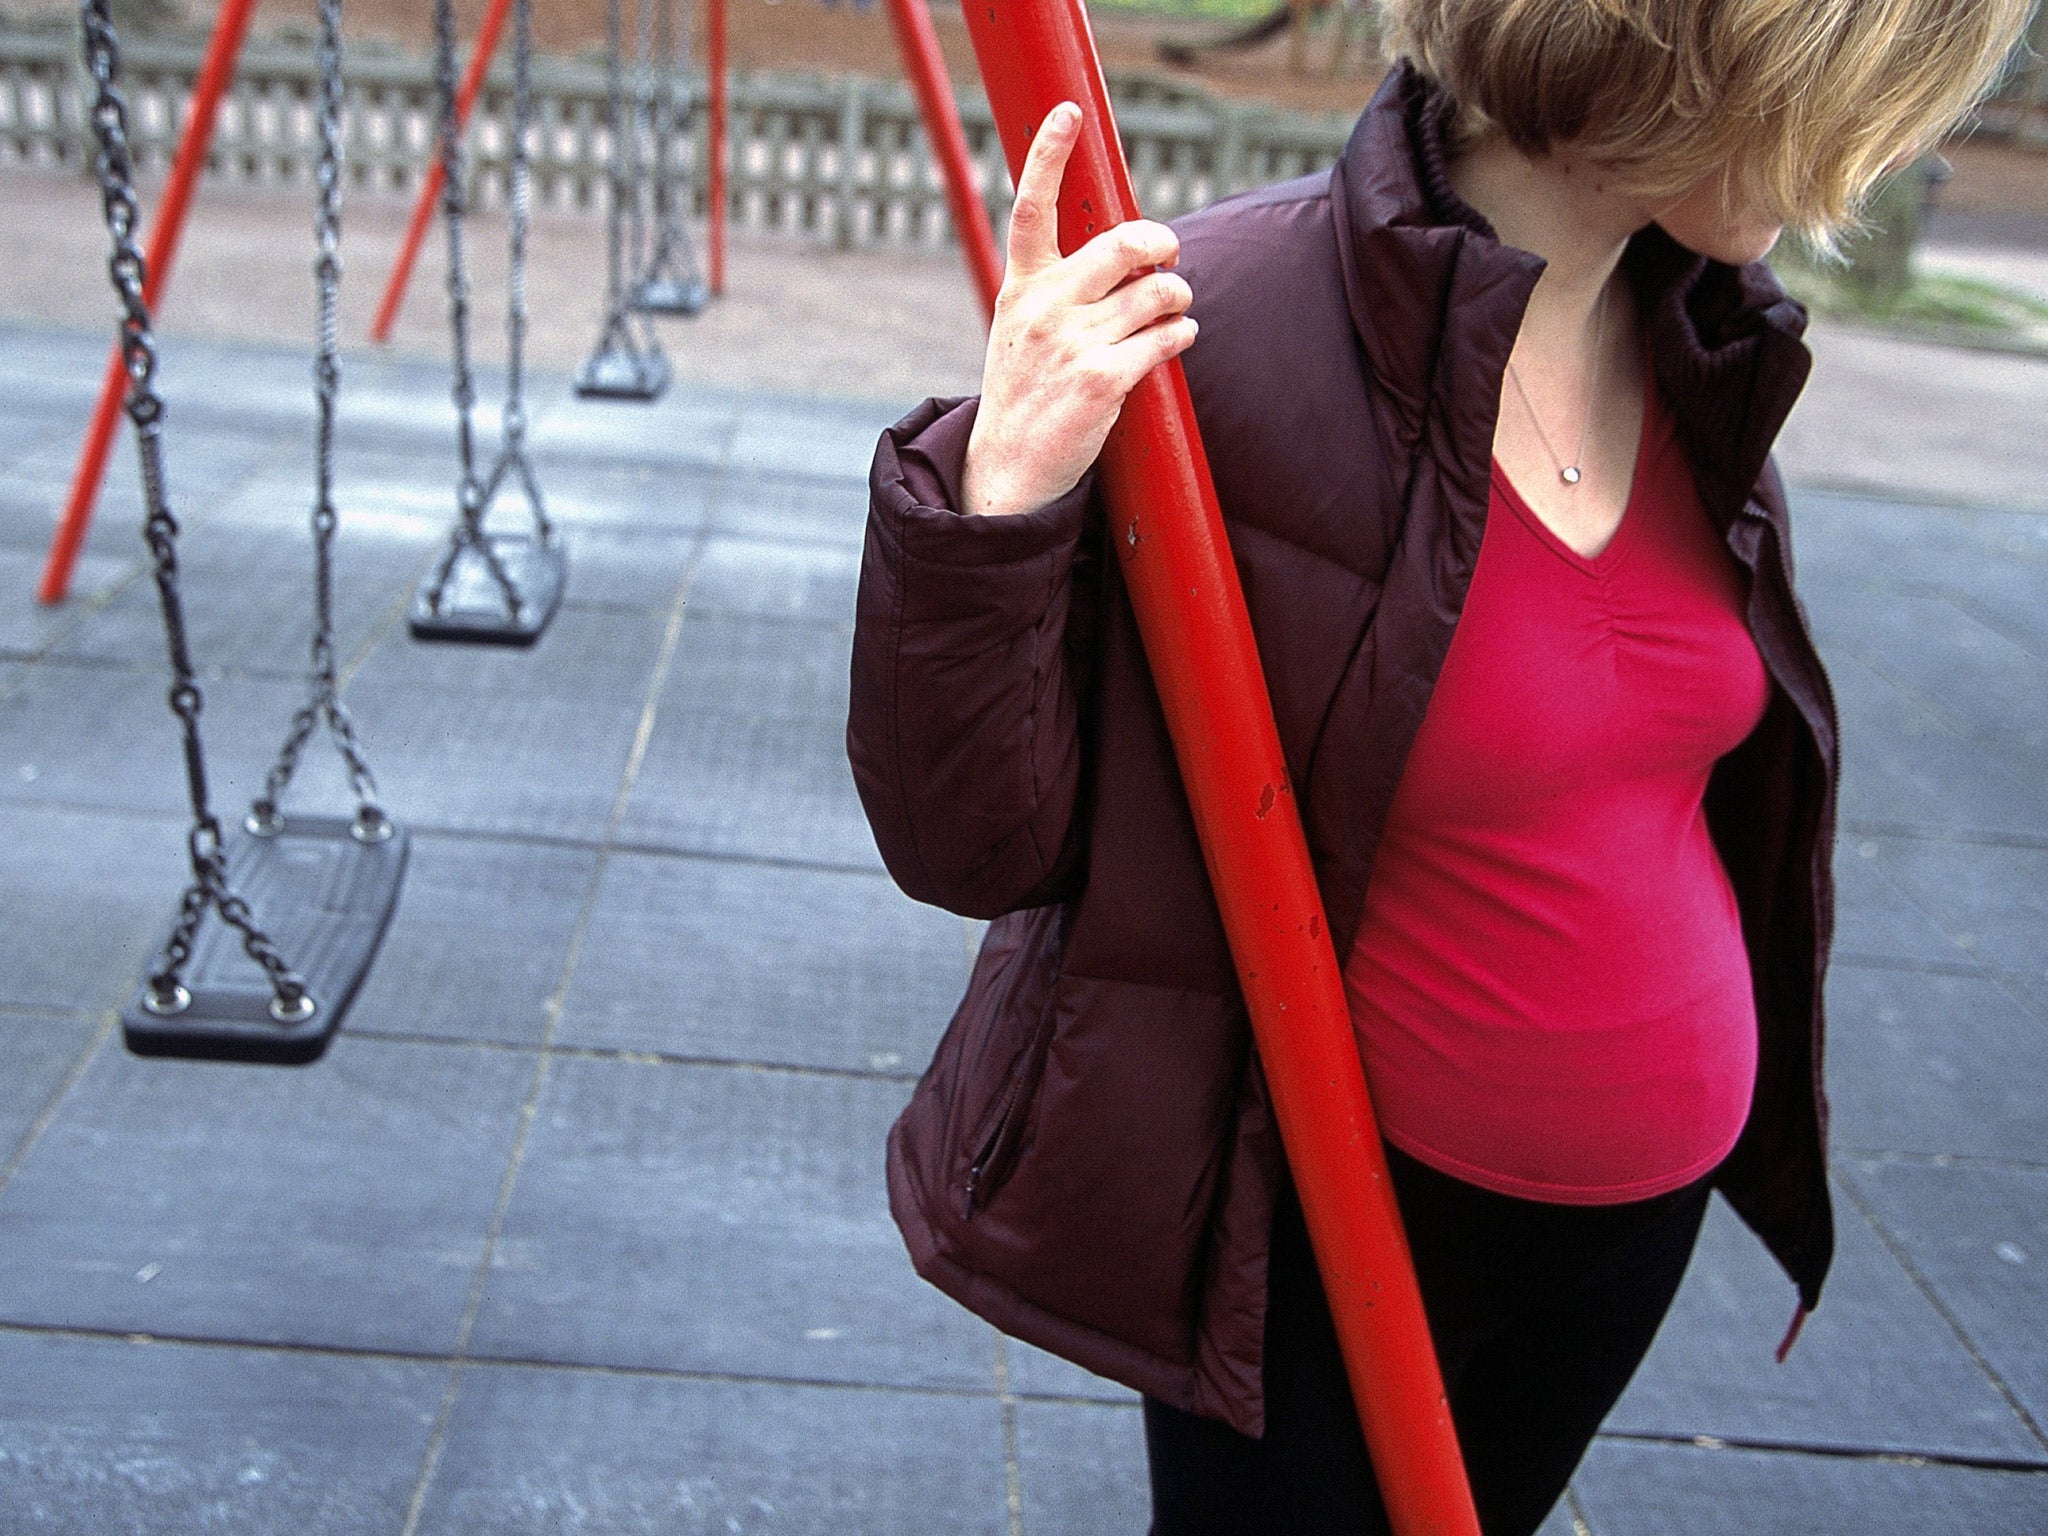 In England and Wales the teenage pregnancy rate is at its lowest since records began in 1969